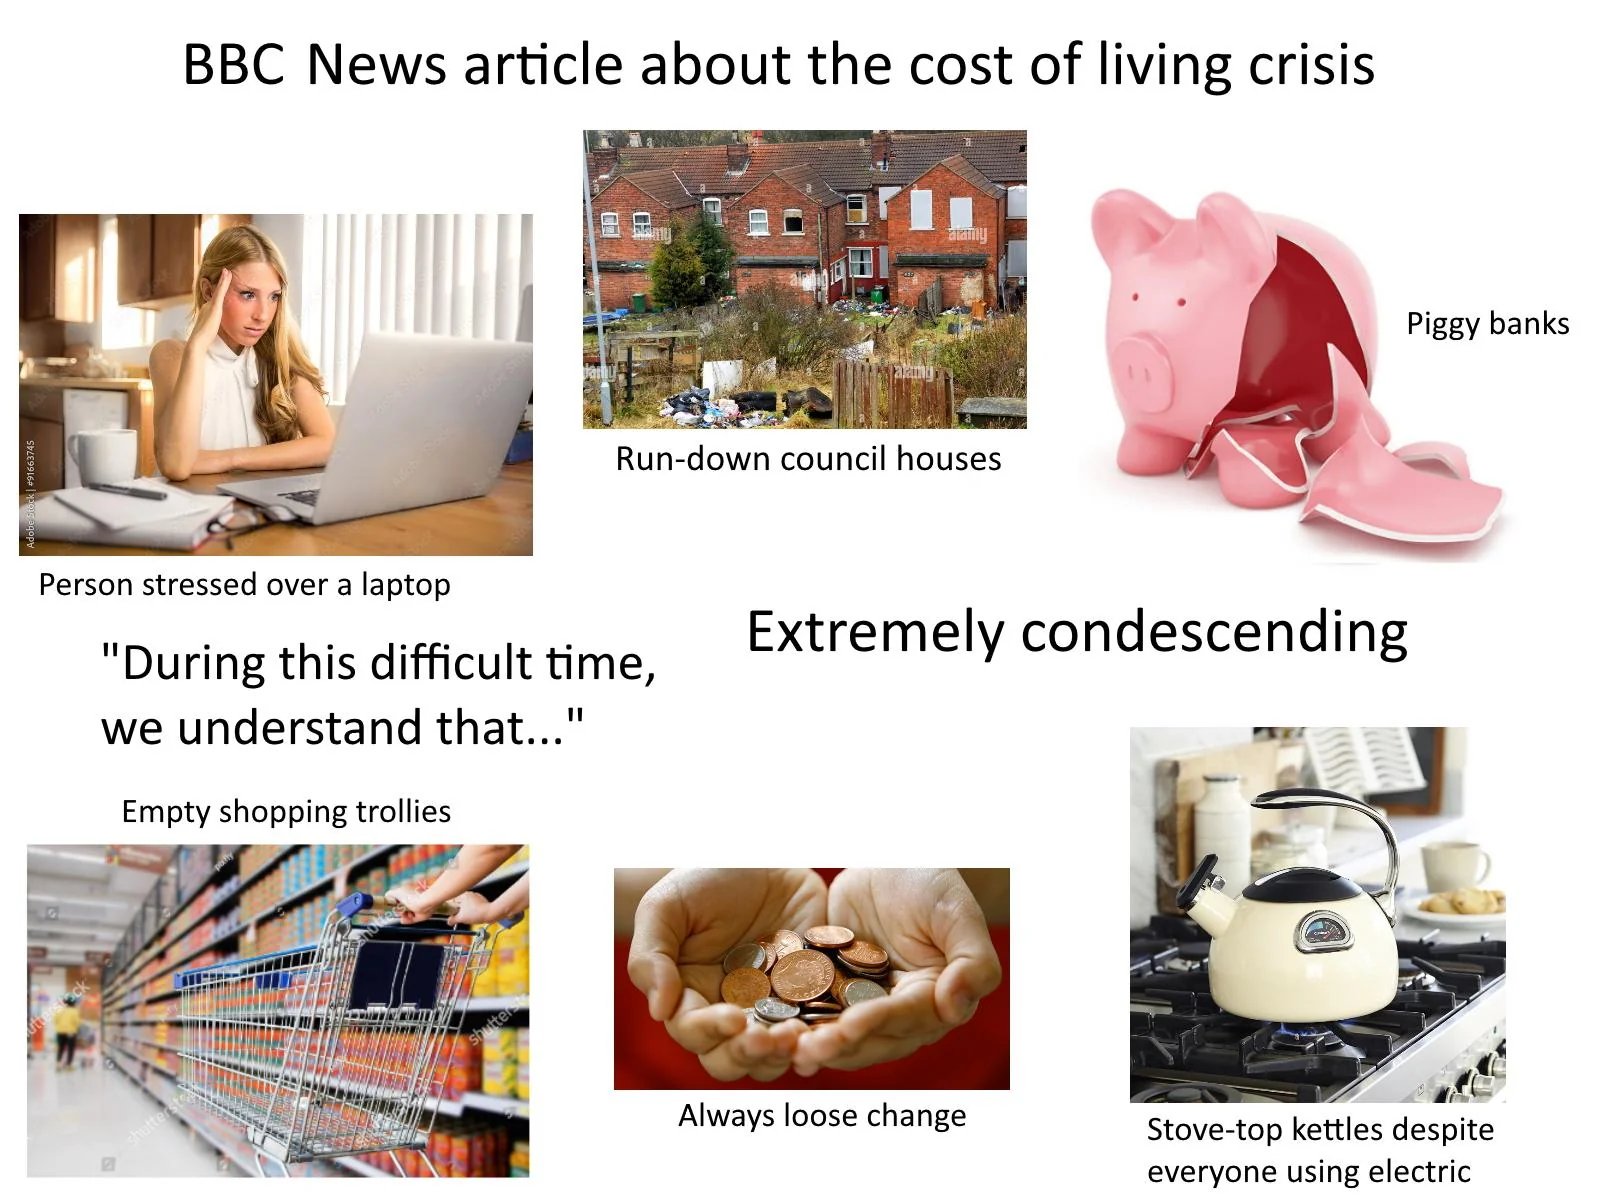 bbc-news-article-about-the-cost-of-living-crisis-starterpack-v0-lk1qdz3t47zb1.webp